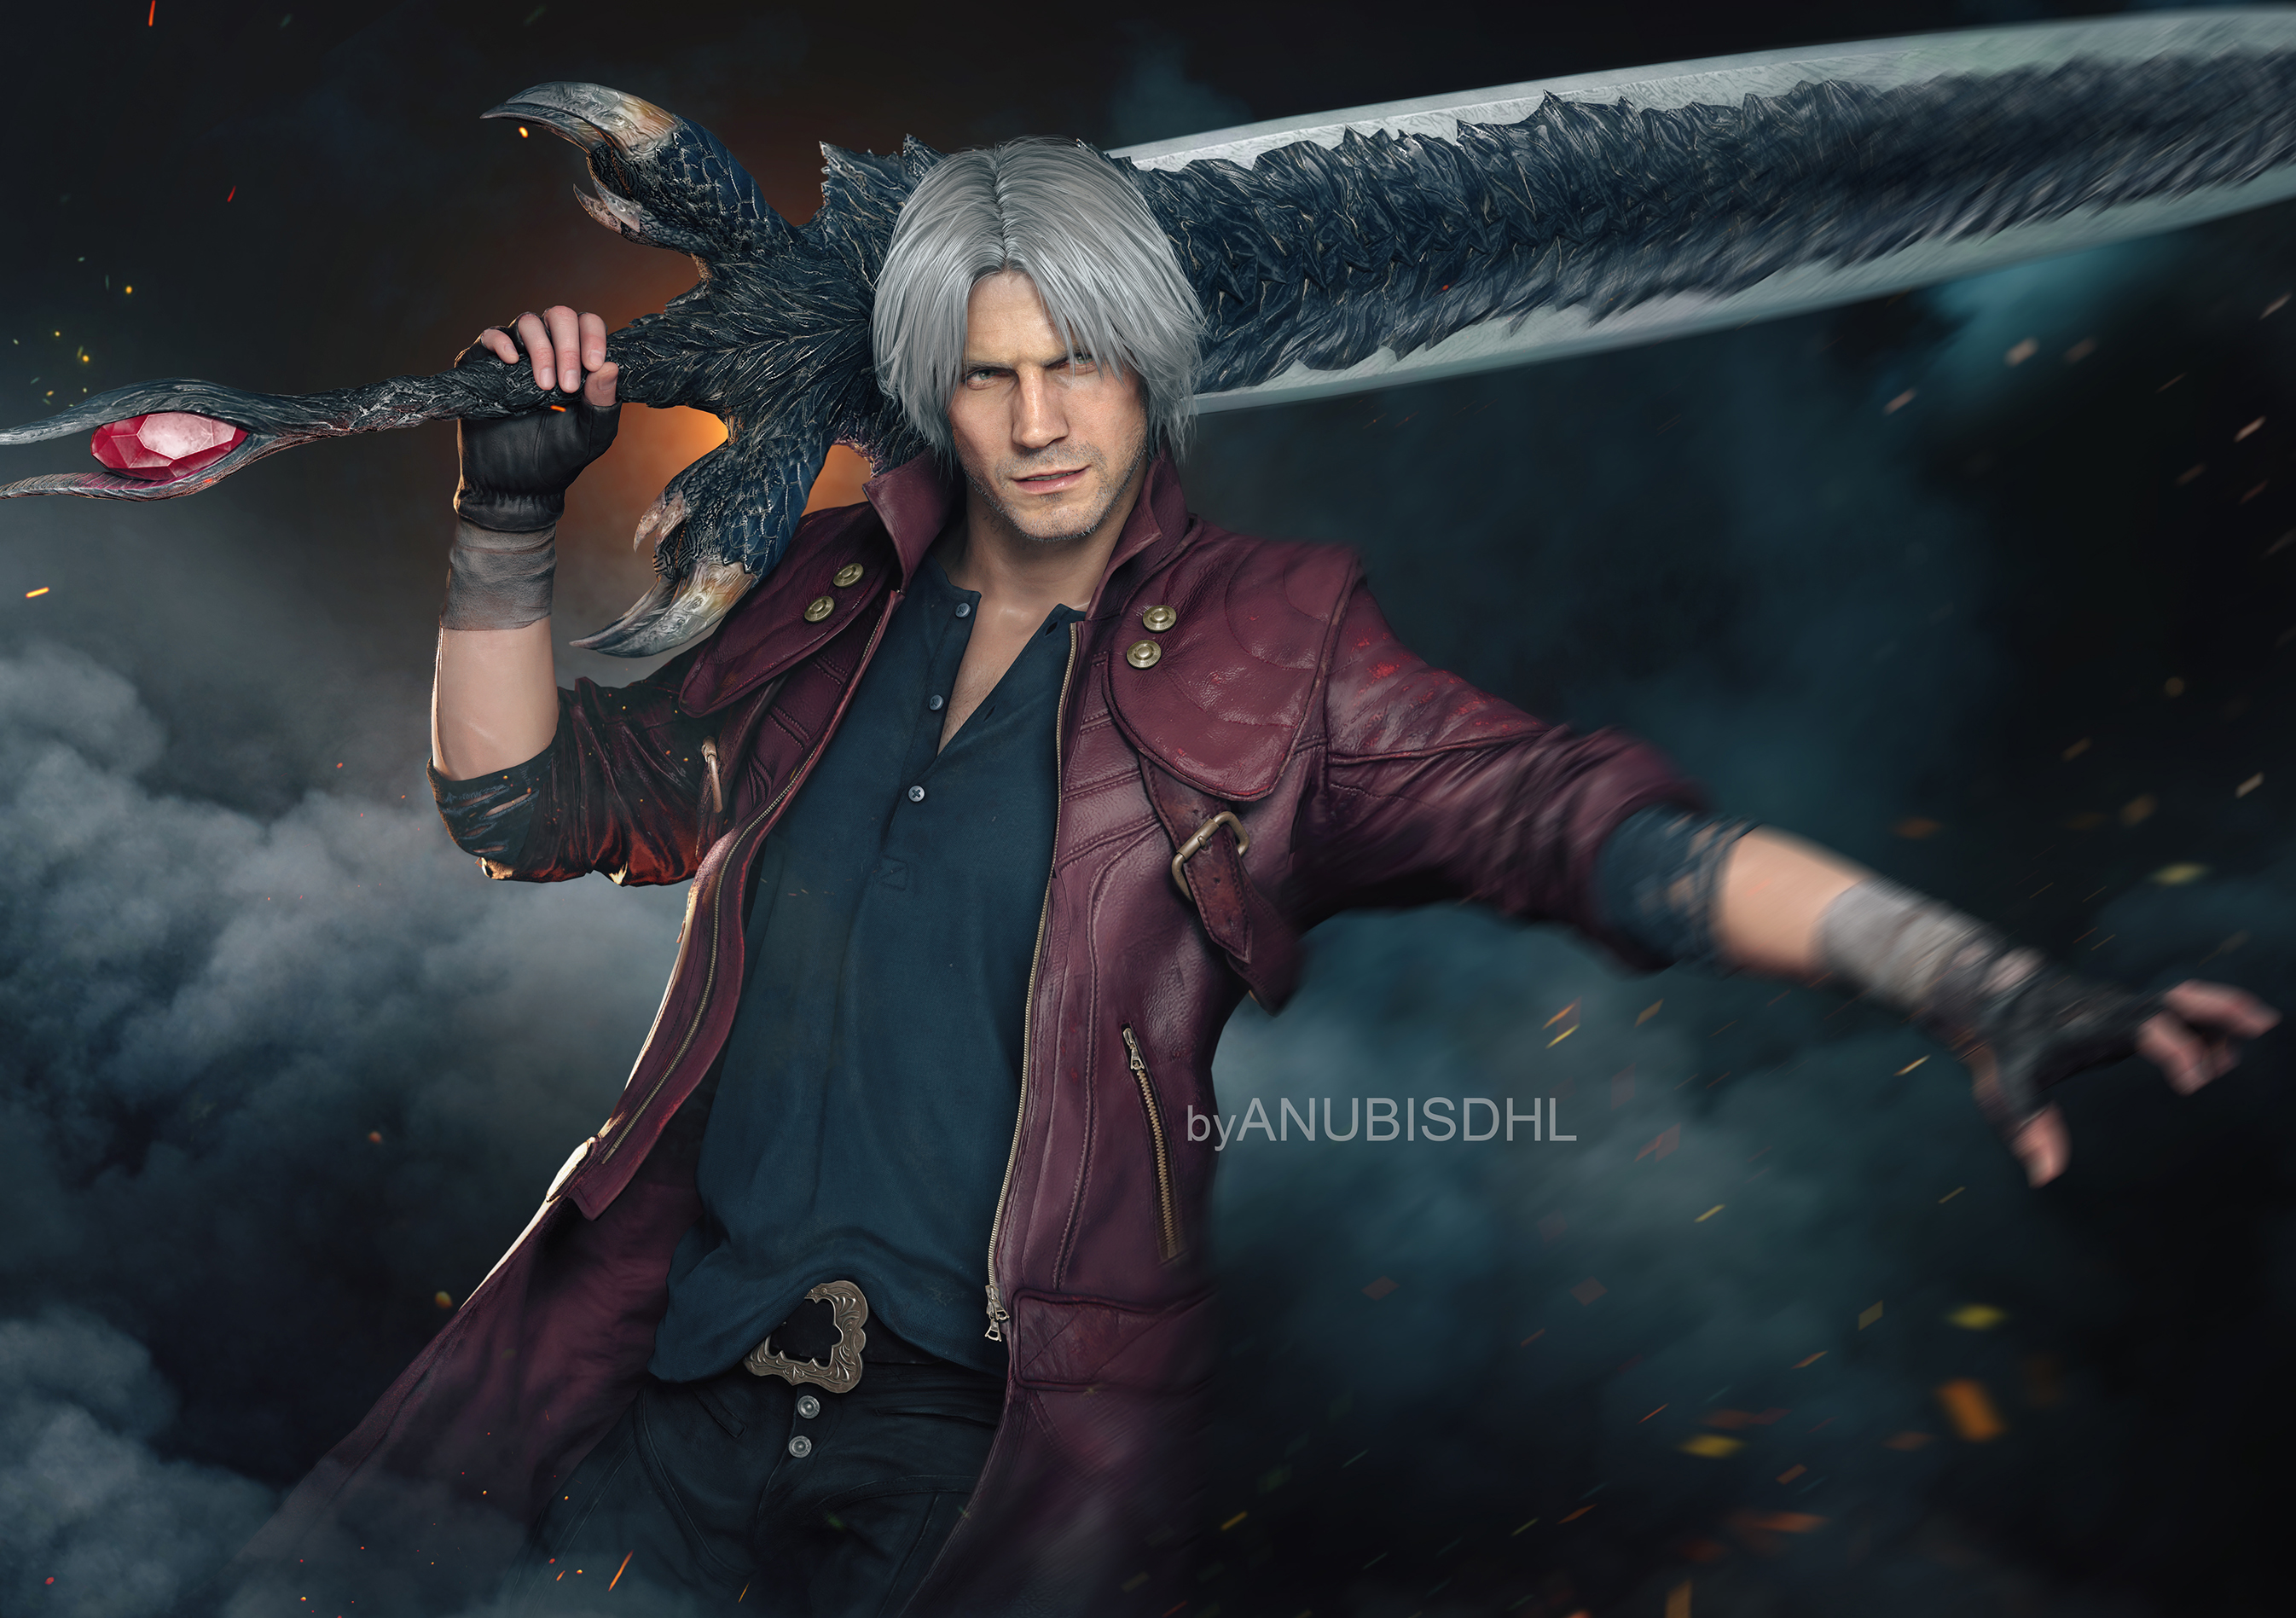 Д данте. Данте Devil May Cry. Данте DMC 5. Devil May Cry 5 Dante. Данте Devil May Cry 3.